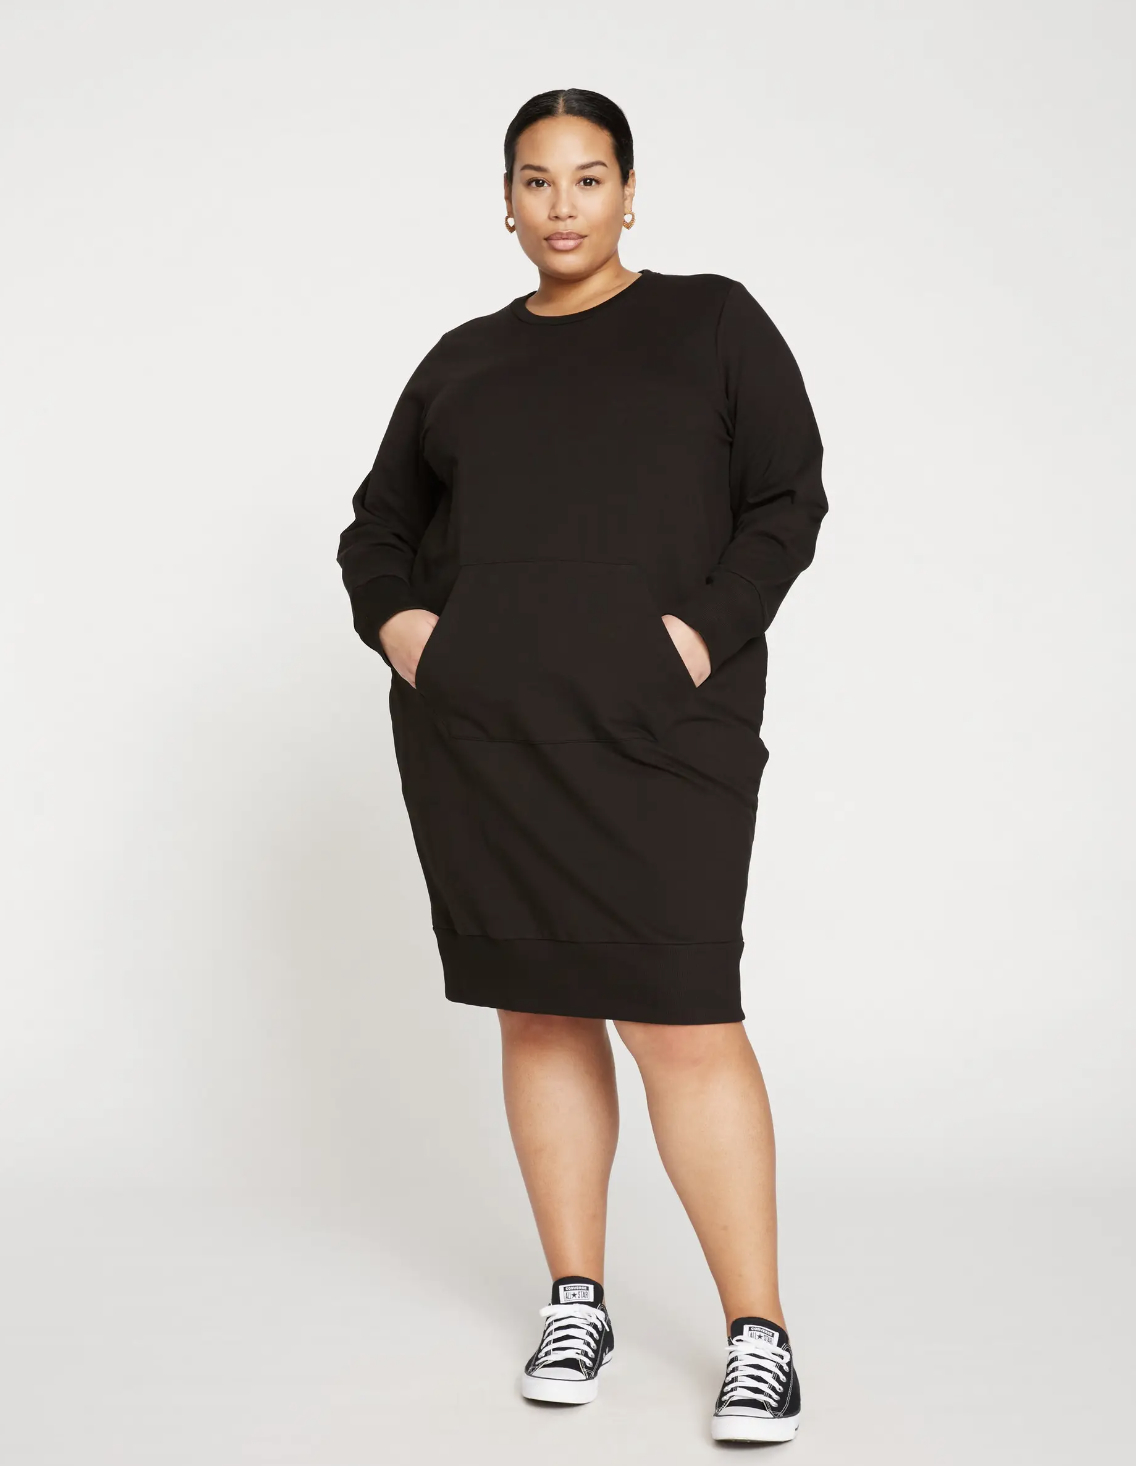 Woman in a casual black dress with pockets, paired with sneakers, poses for a shopping feature